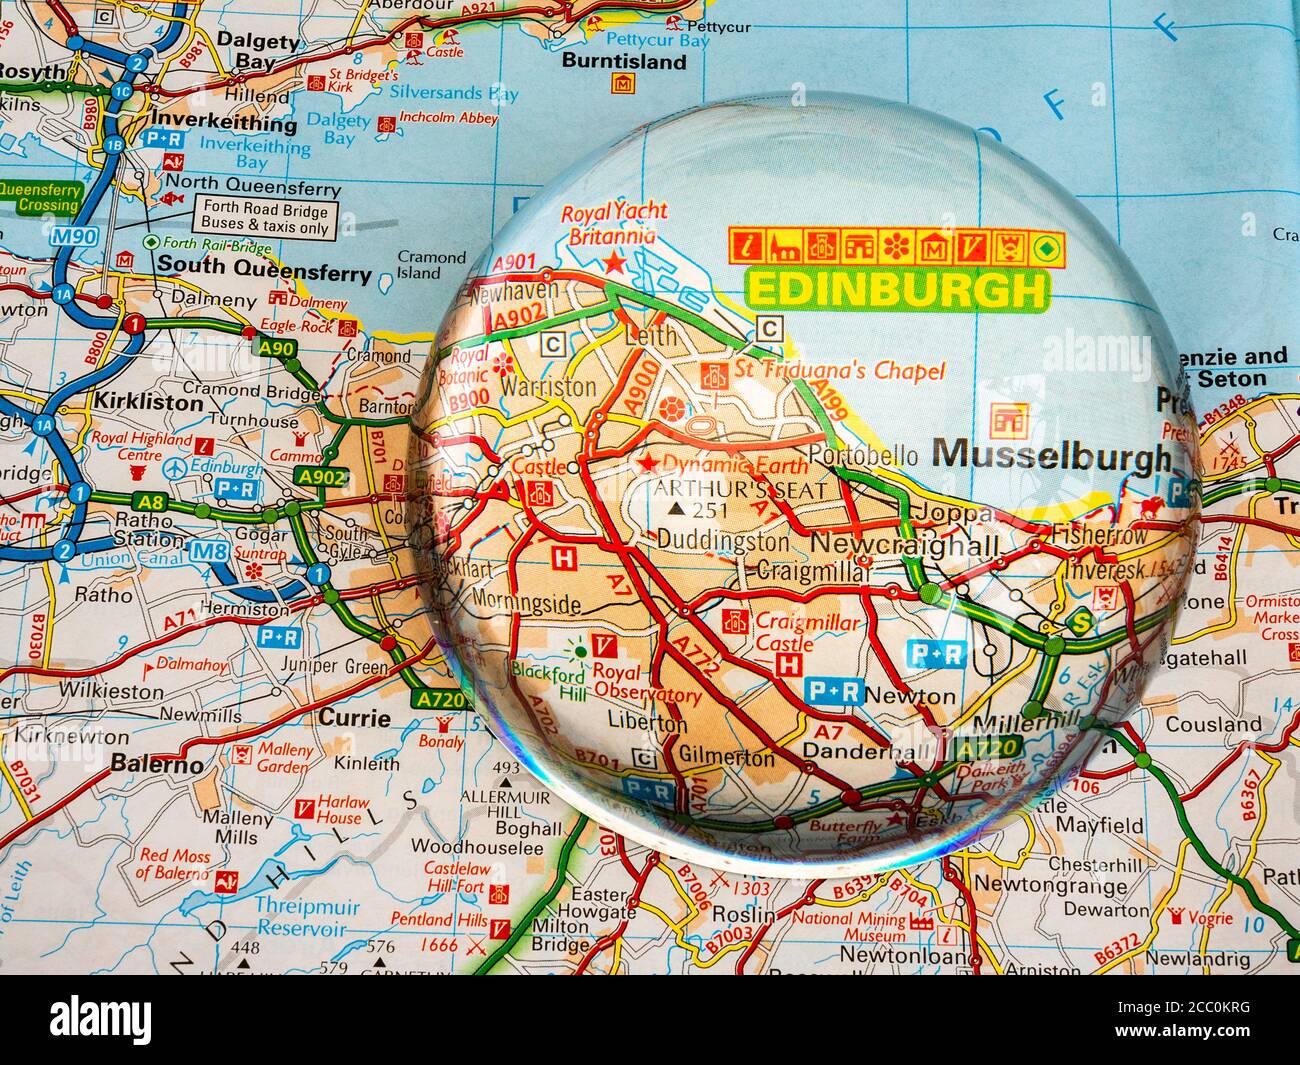 Closeup of a dome shaped magnifying glass over a page of a British road atlas map, with the Edinburgh area of Scotland enlarged for a closer view. Stock Photo